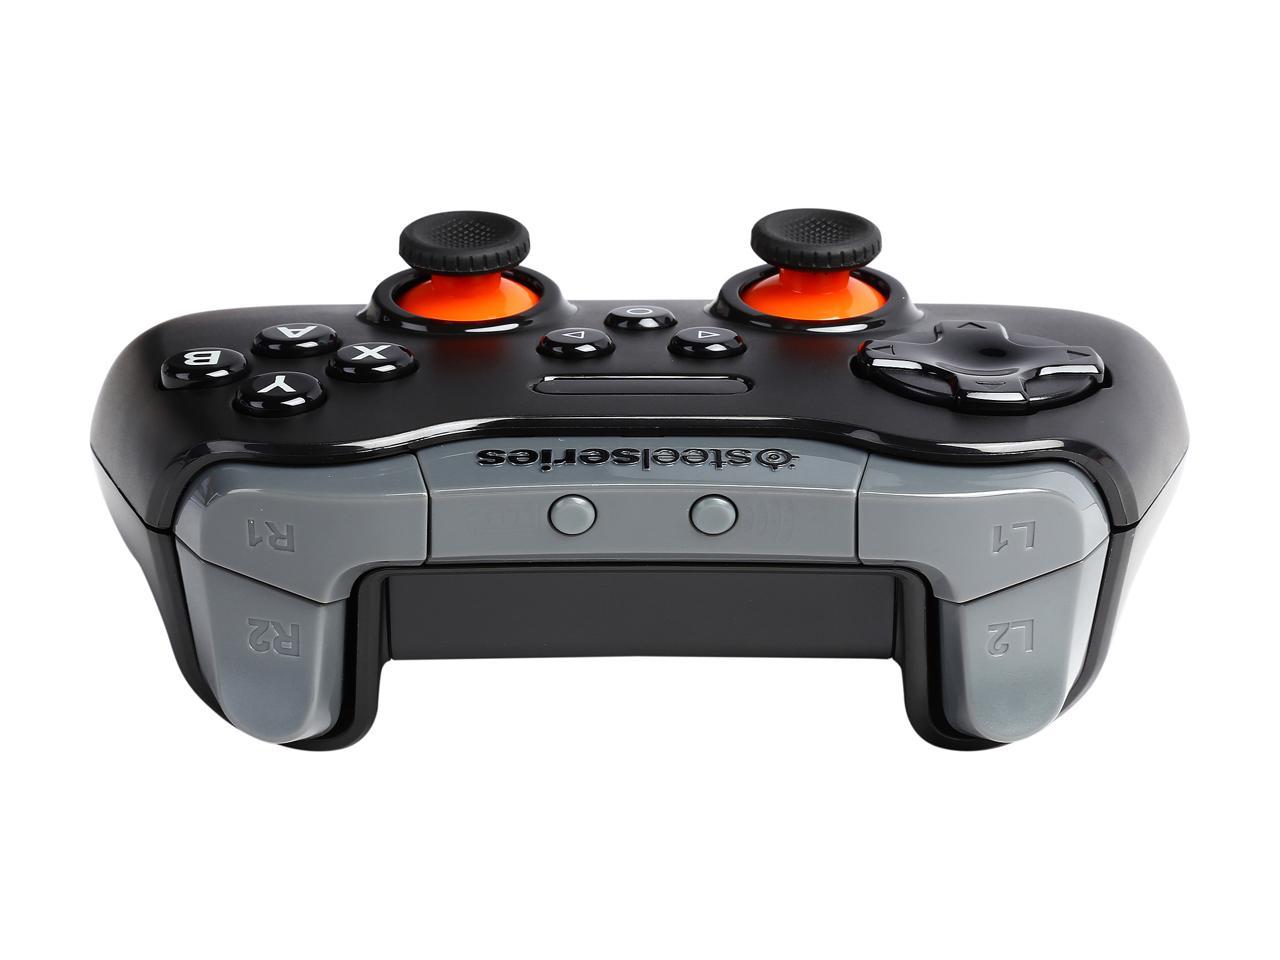 Detail Steelseries Stratus Xl Wireless Gamepad For Android Nomer 25